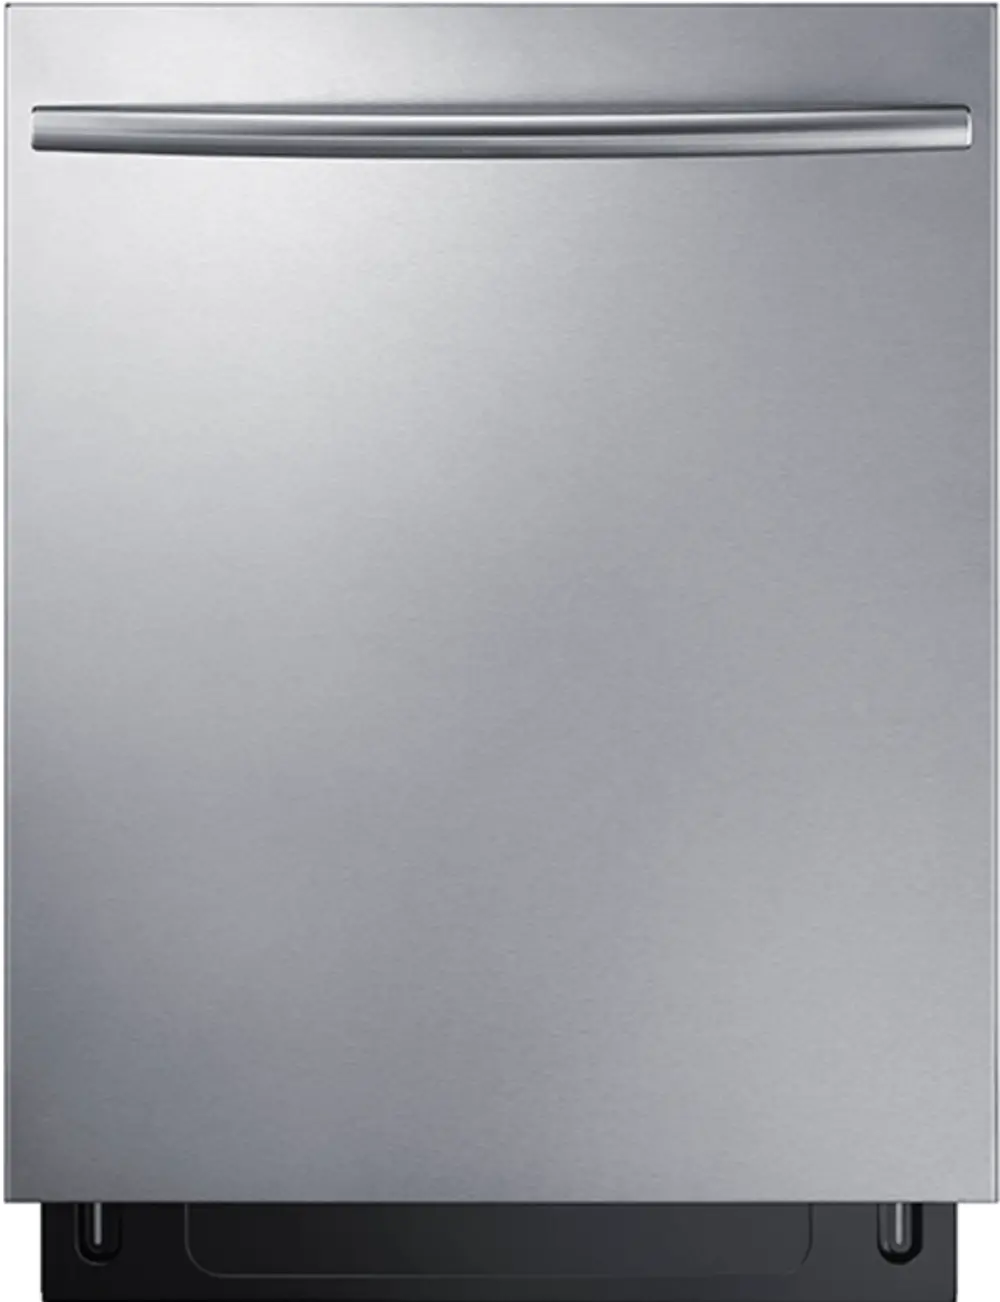 DW80K7050US Samsung Dishwasher with Bar Handle - Stainless Steel-1